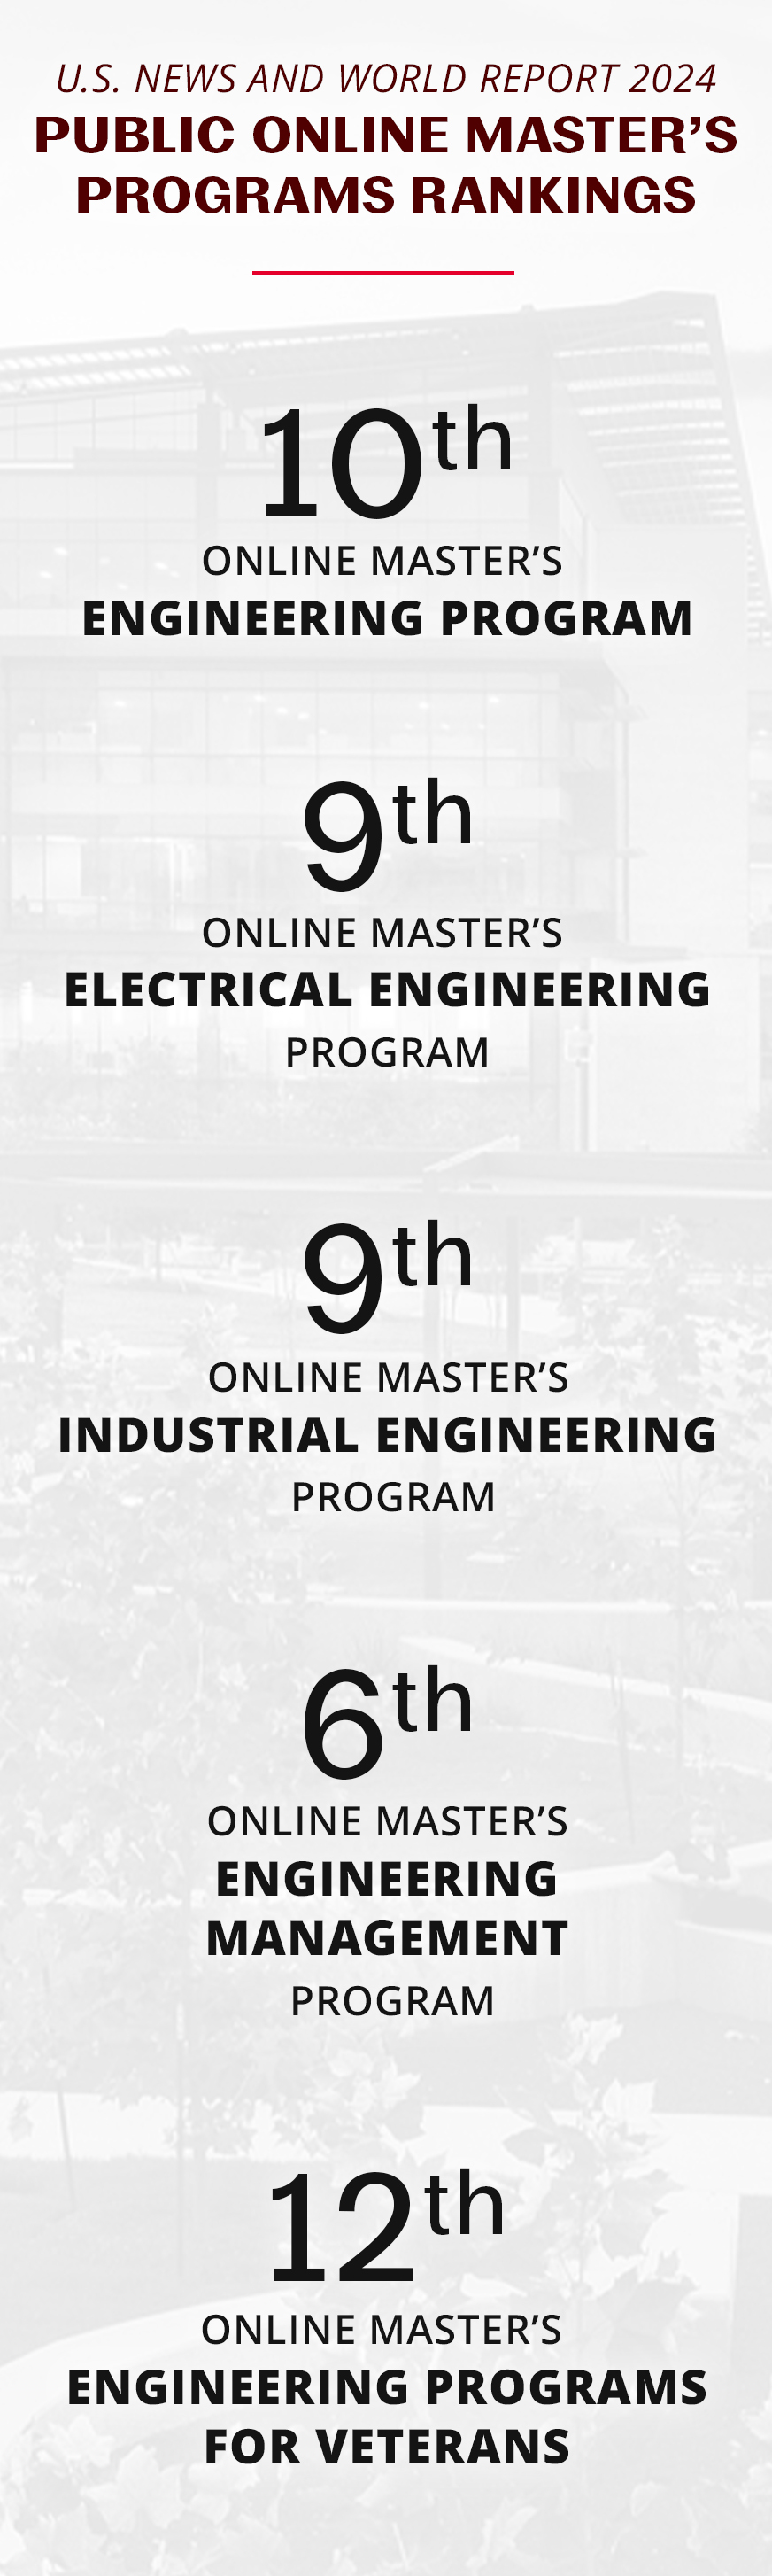 US News and World Report Public Online Master's Program Rankings: 10th overall, 9th for electrical engineering, 9th for industrial engineering, 6th for engineering management, and 12th for veterans programs. 